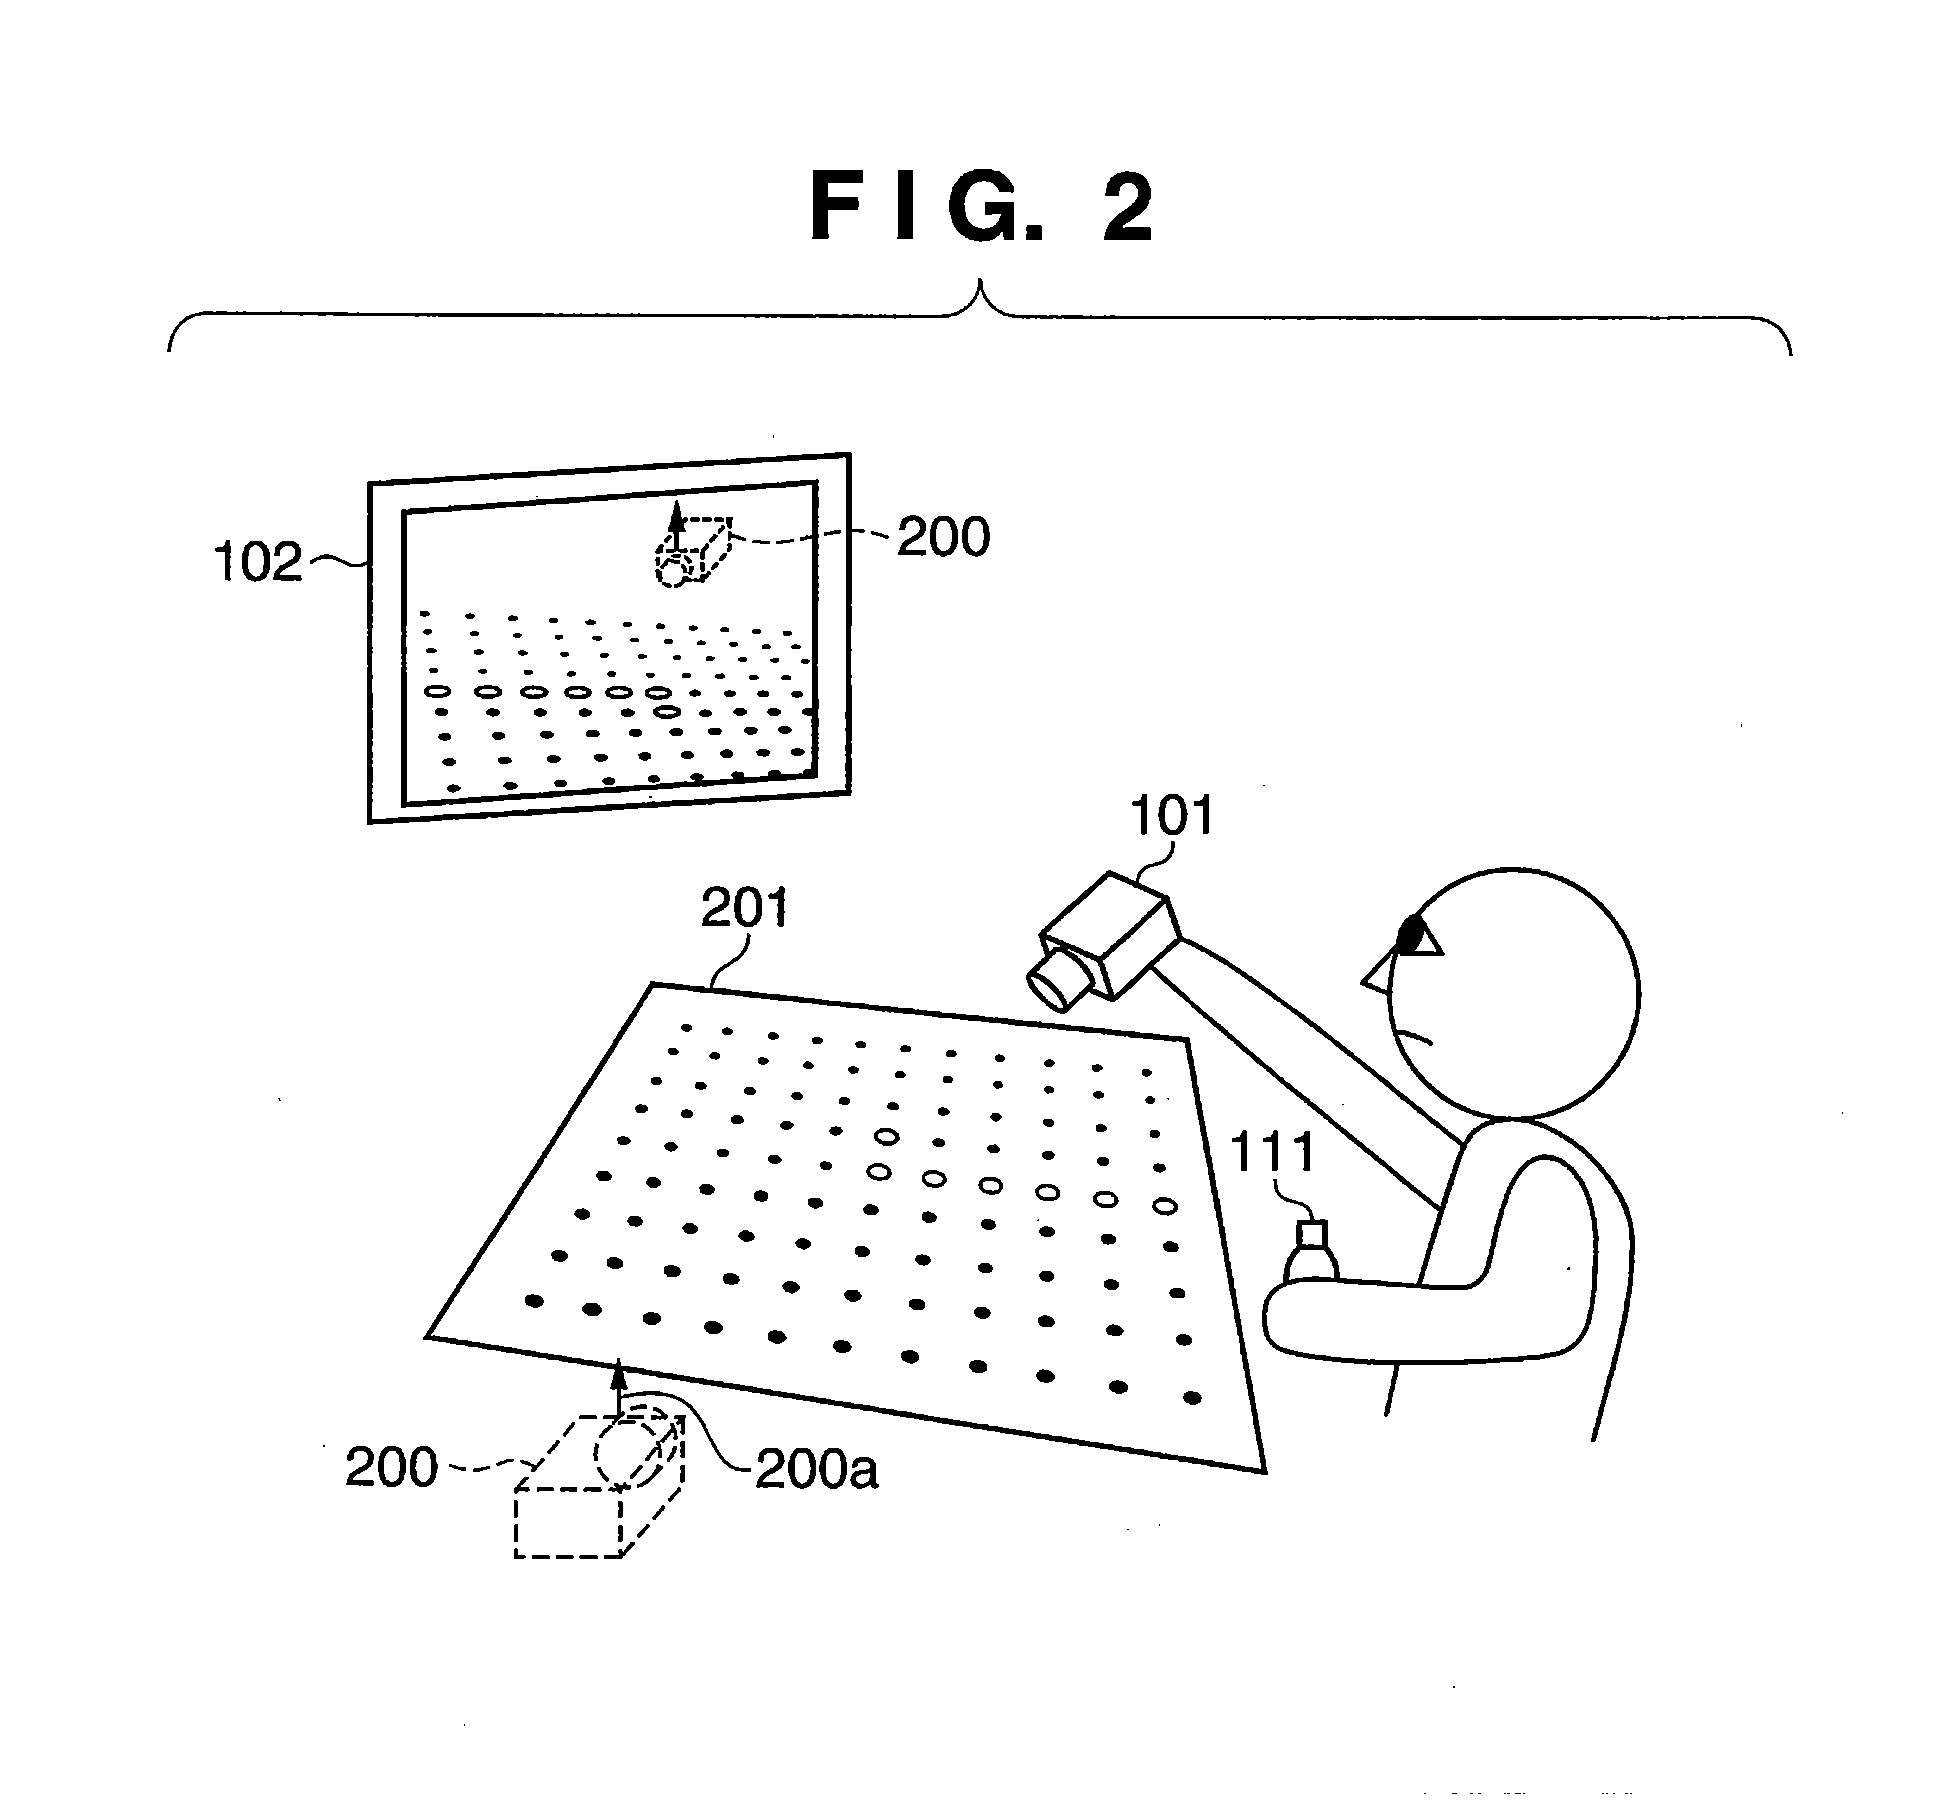 Image capture environment calibration method and information processing apparatus